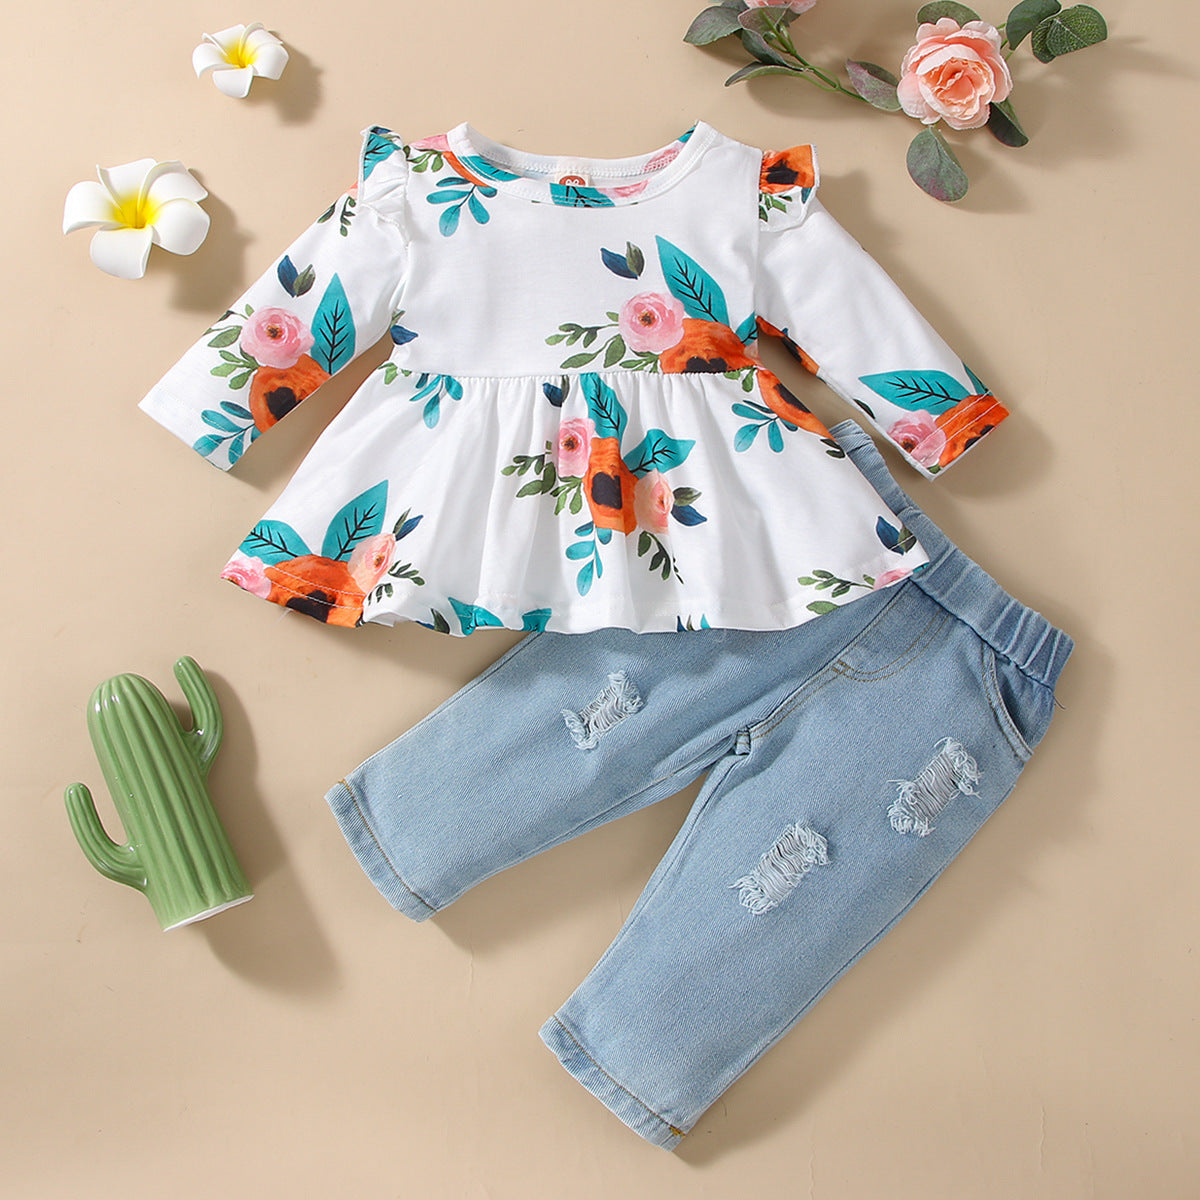 Baby Girl Suit Long Sleeve Floral Denim Fall 2 Pcs Sets